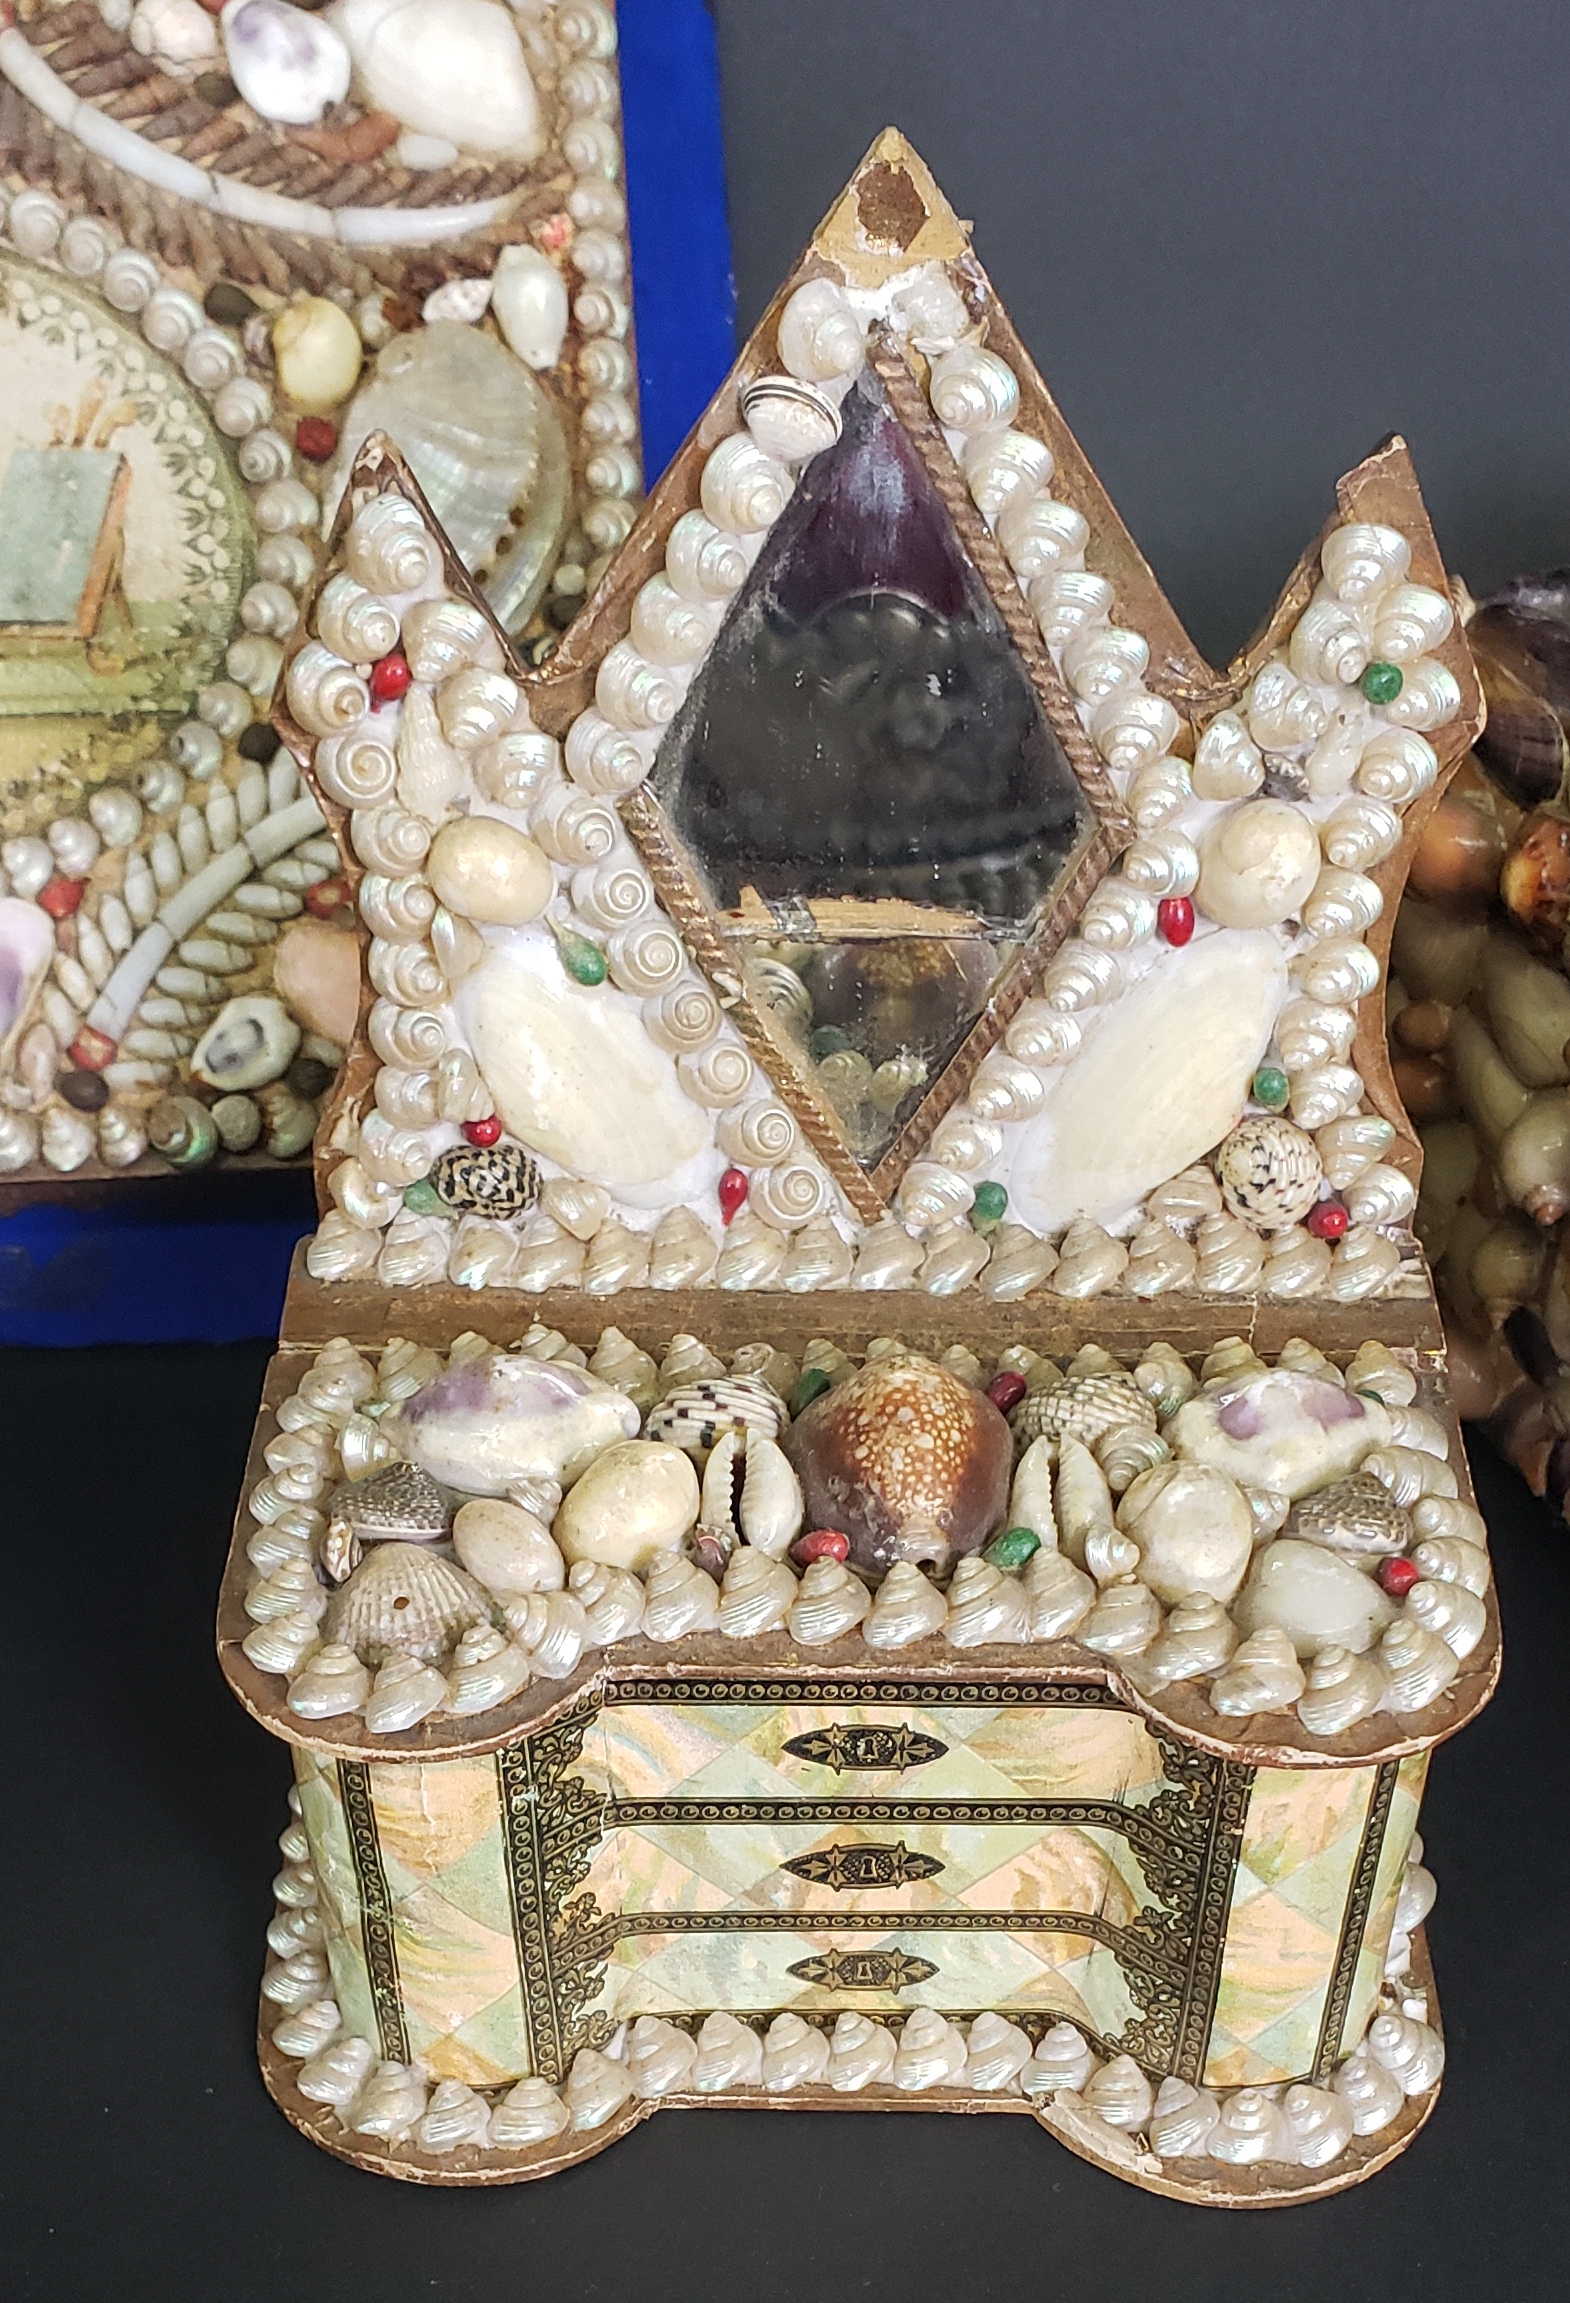 Group of Antique and Vintage Souvenir Shell Encrusted Ornaments